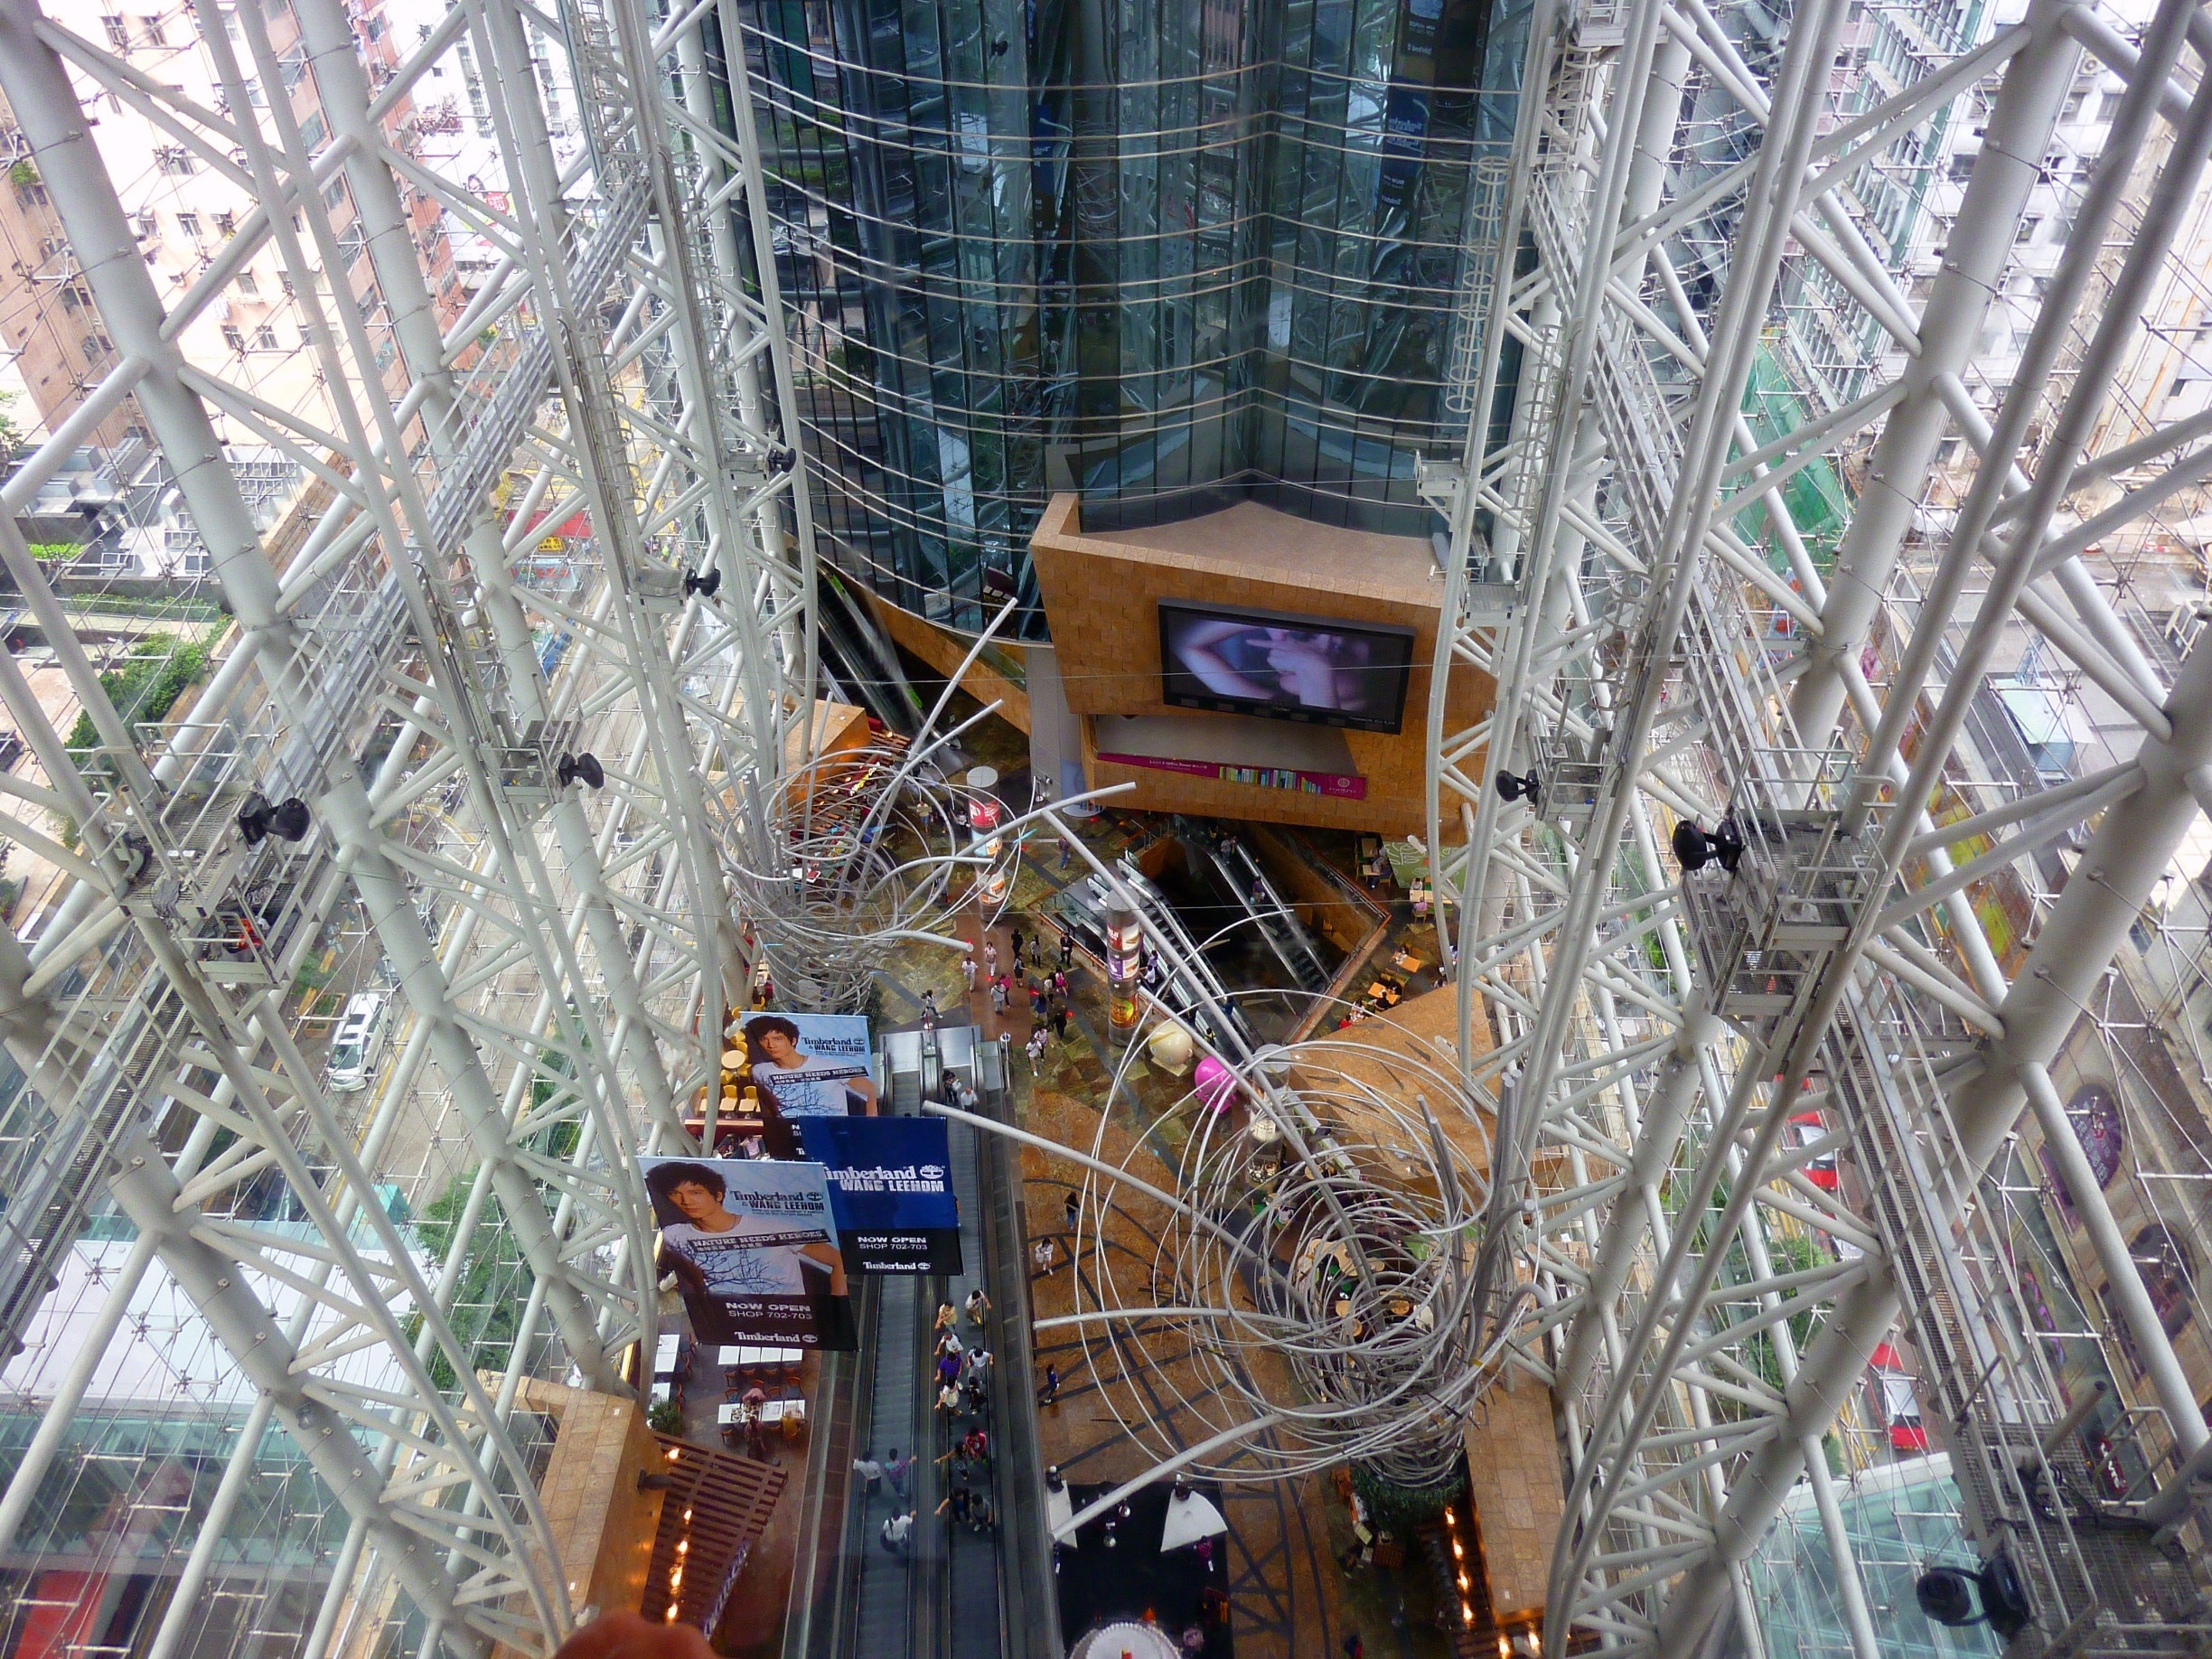 Langham Place, the largest mall in Mong Kok, Kowloon, Hong Kong.  It has a corkscrew design with over 200 stores and I believe more than thirteen floors (I lost count after the 12th).